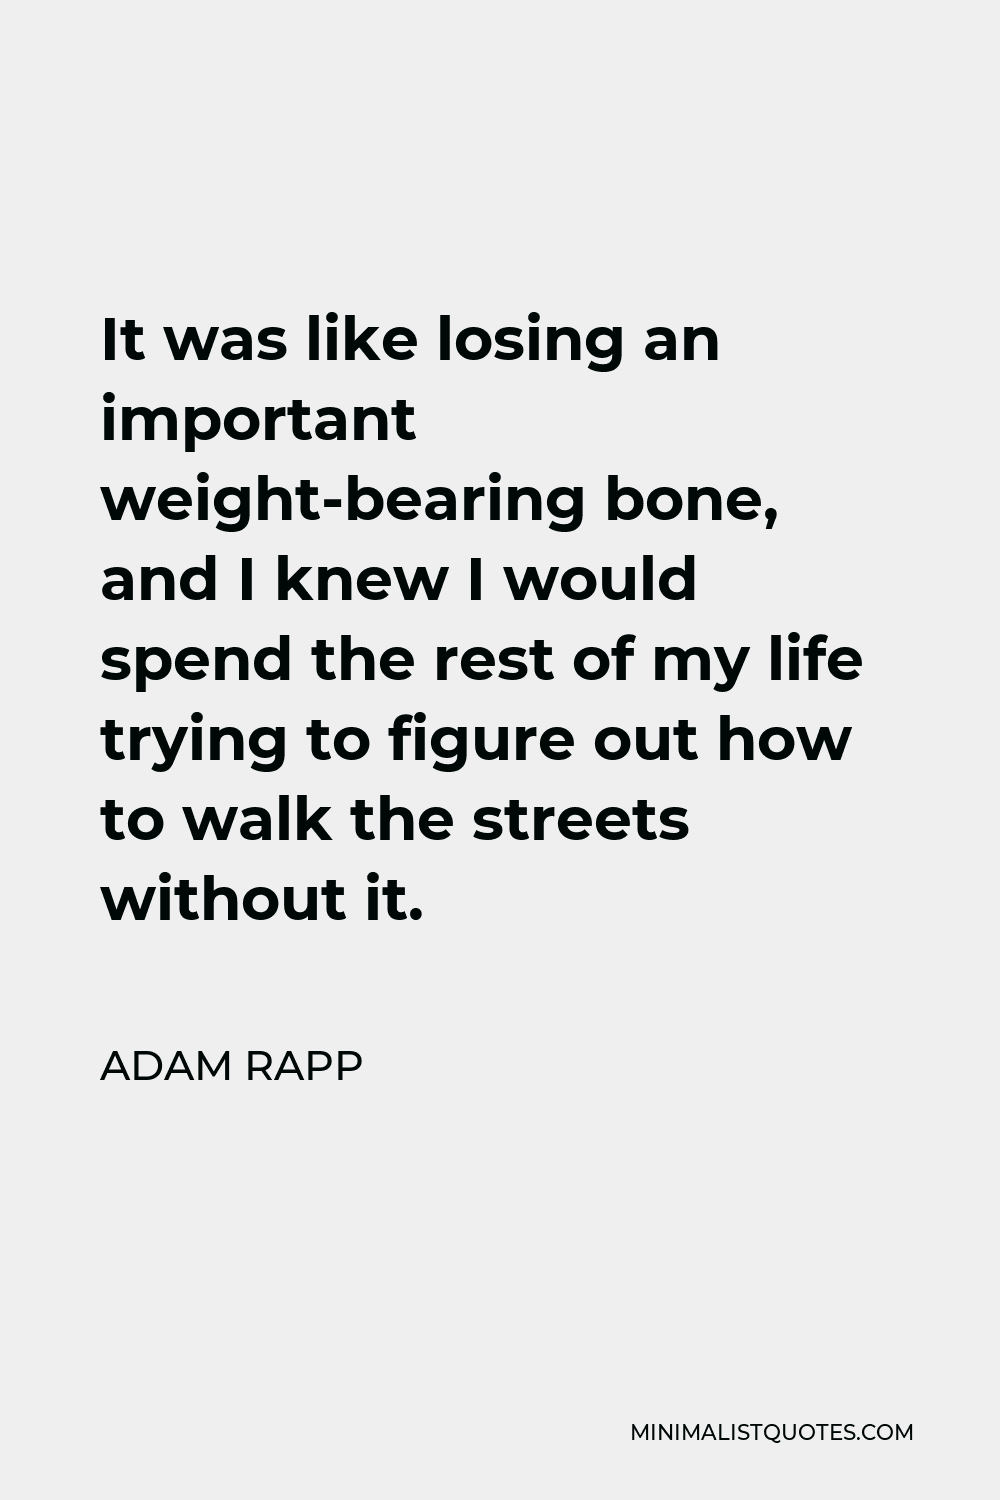 Adam Rapp Quote - It was like losing an important weight-bearing bone, and I knew I would spend the rest of my life trying to figure out how to walk the streets without it.